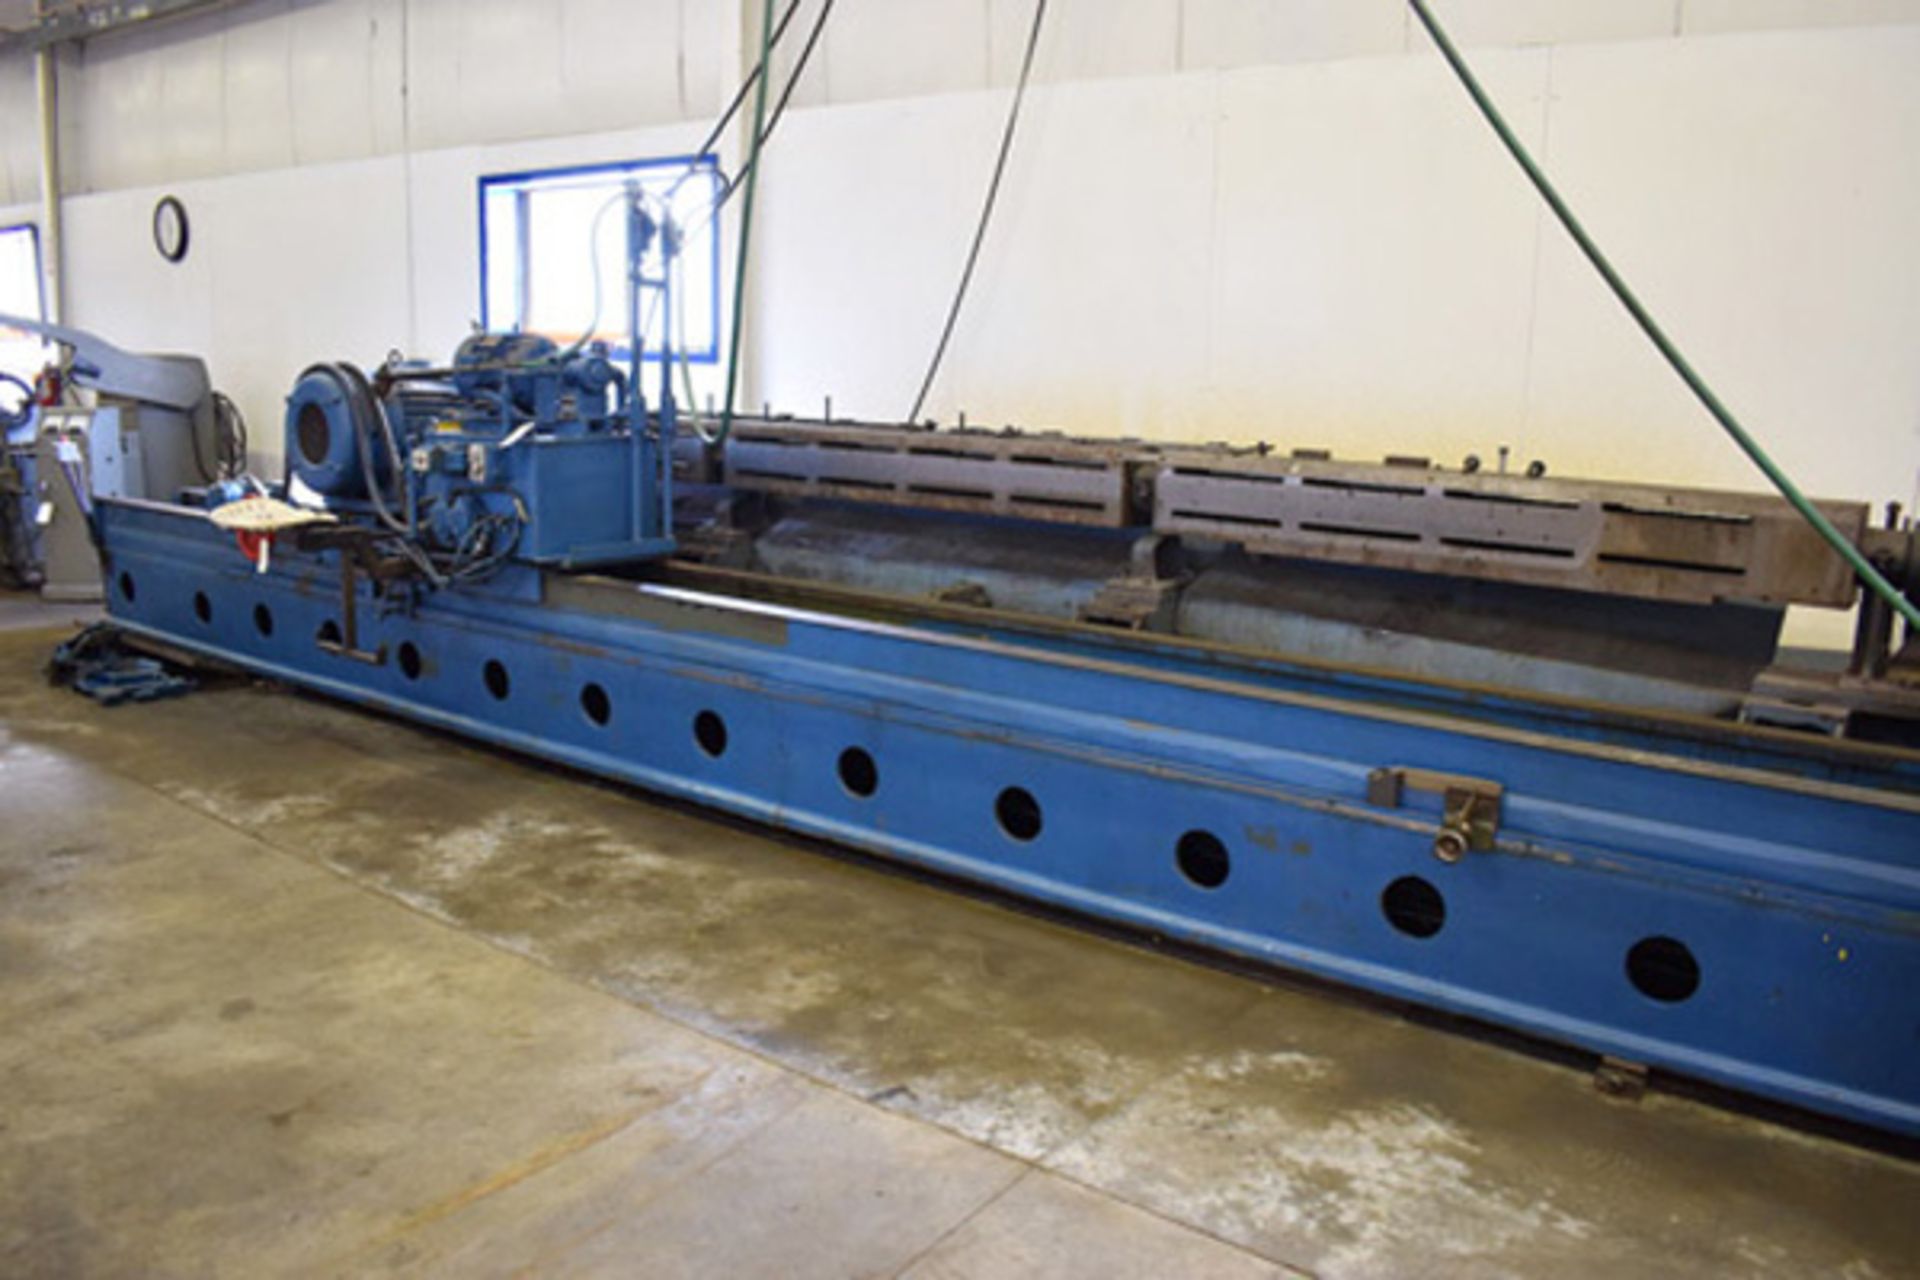 Hanchett Traveling Wheel Knife Grinder, 212", Mdl: AK-212C, S/N: AK316, Located In: Painesville, OH - Image 2 of 9